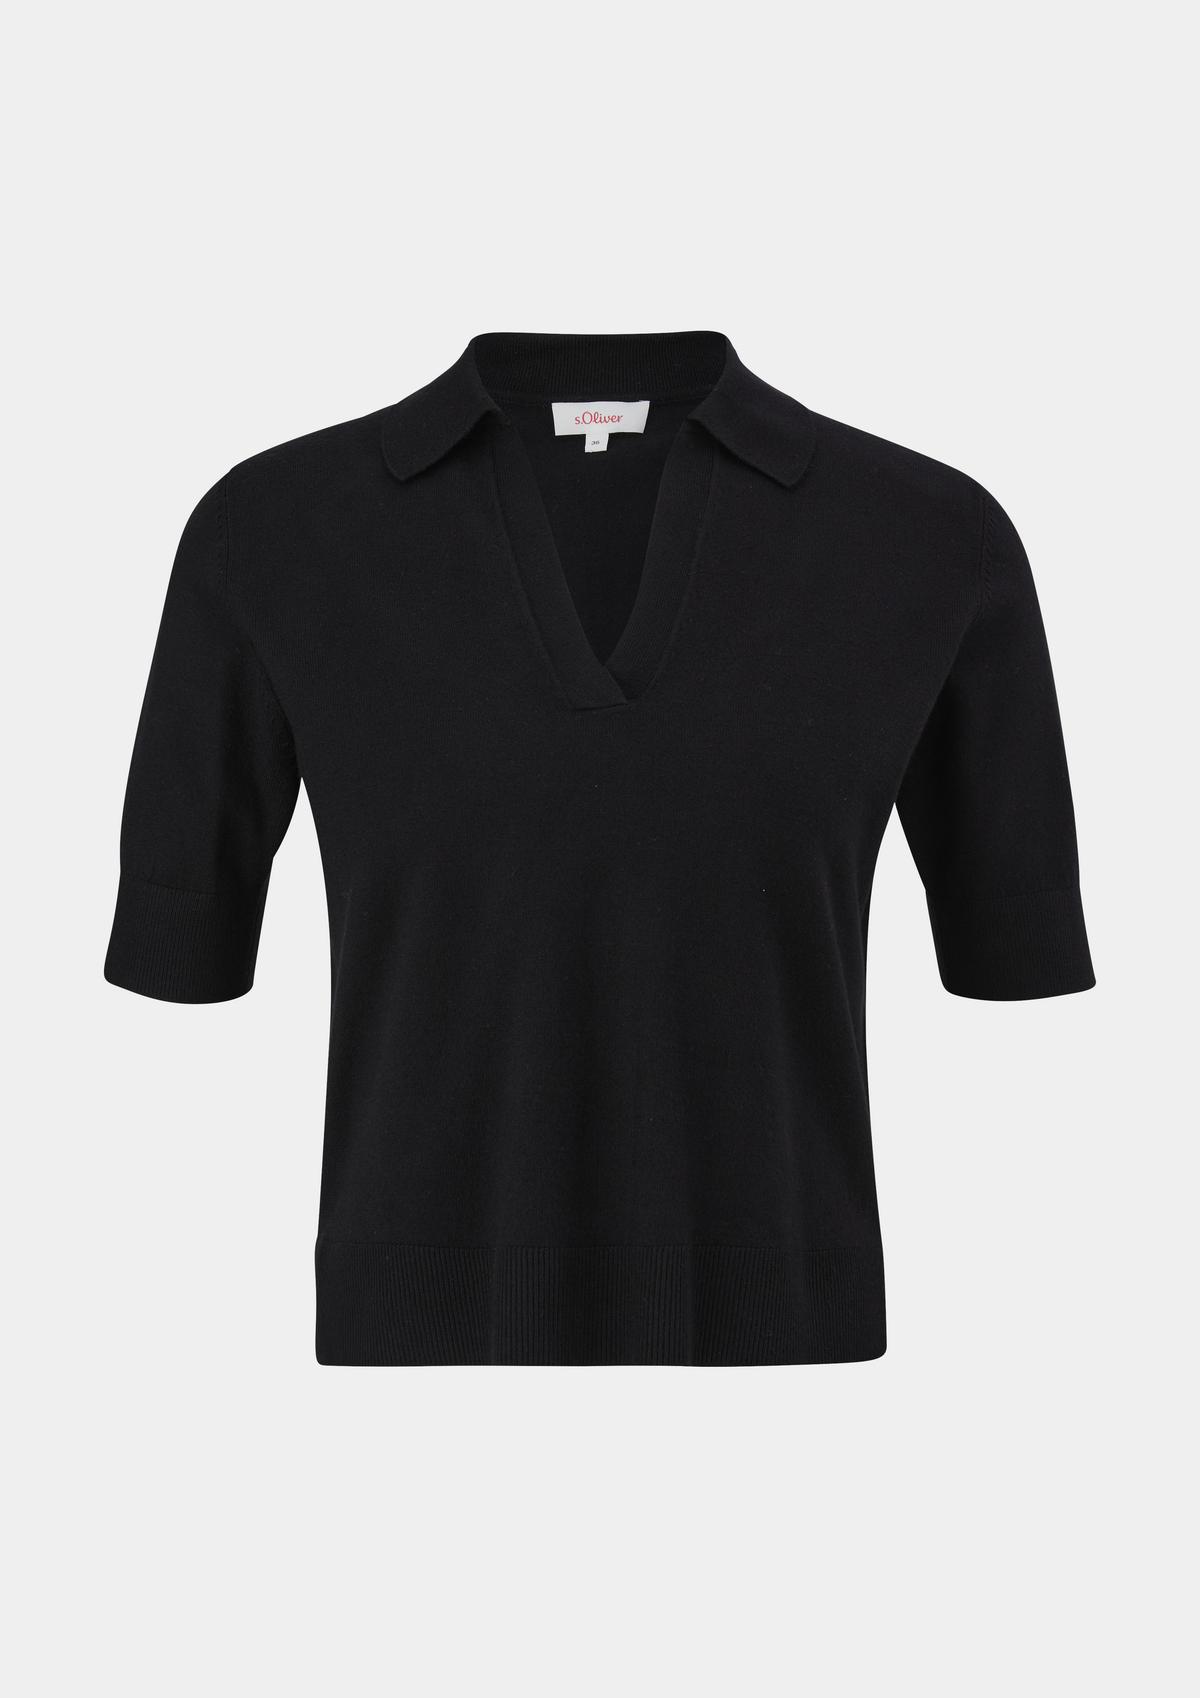 Buy online polo womens shirts